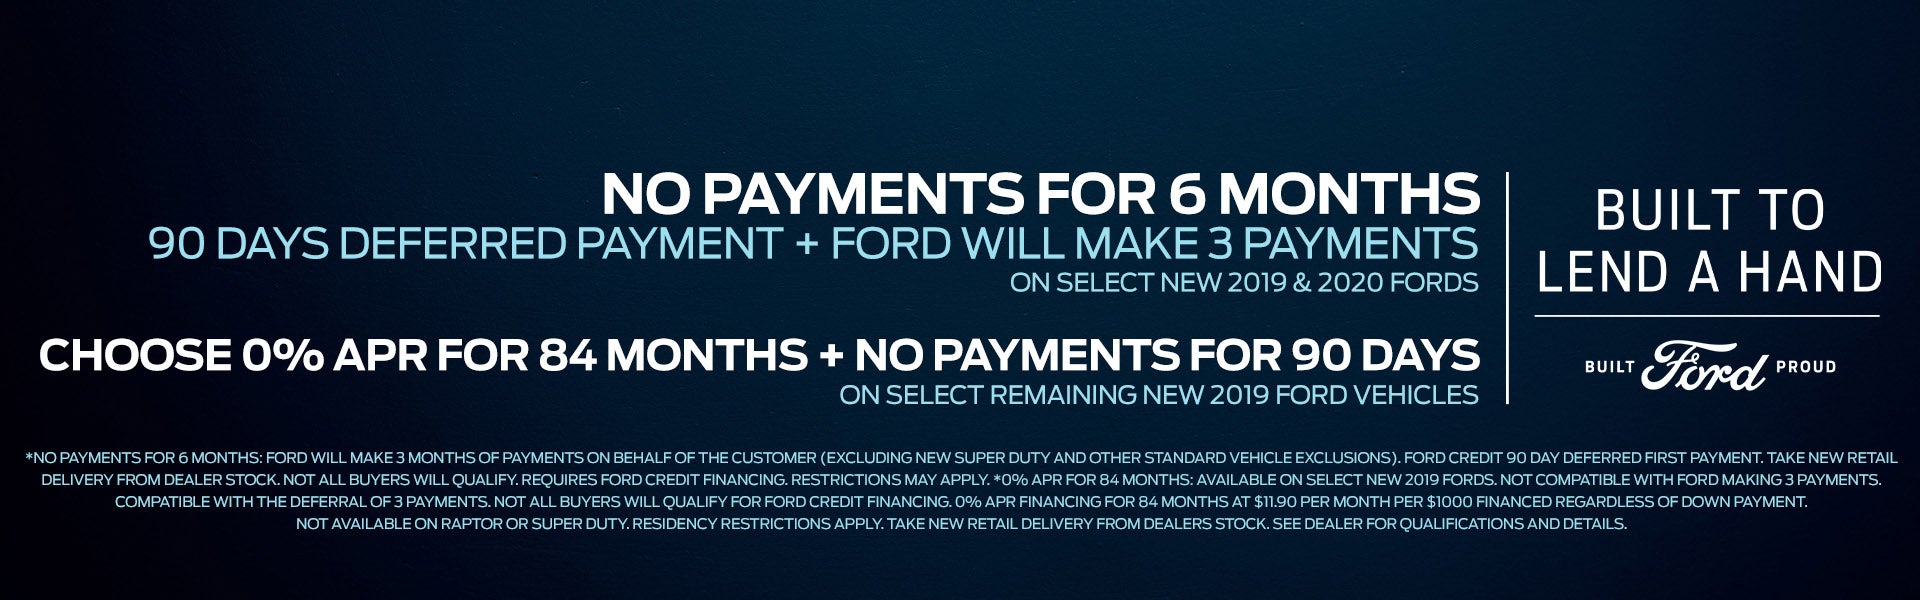 0% APR for 84 months on select 2019 Ford Vehicles